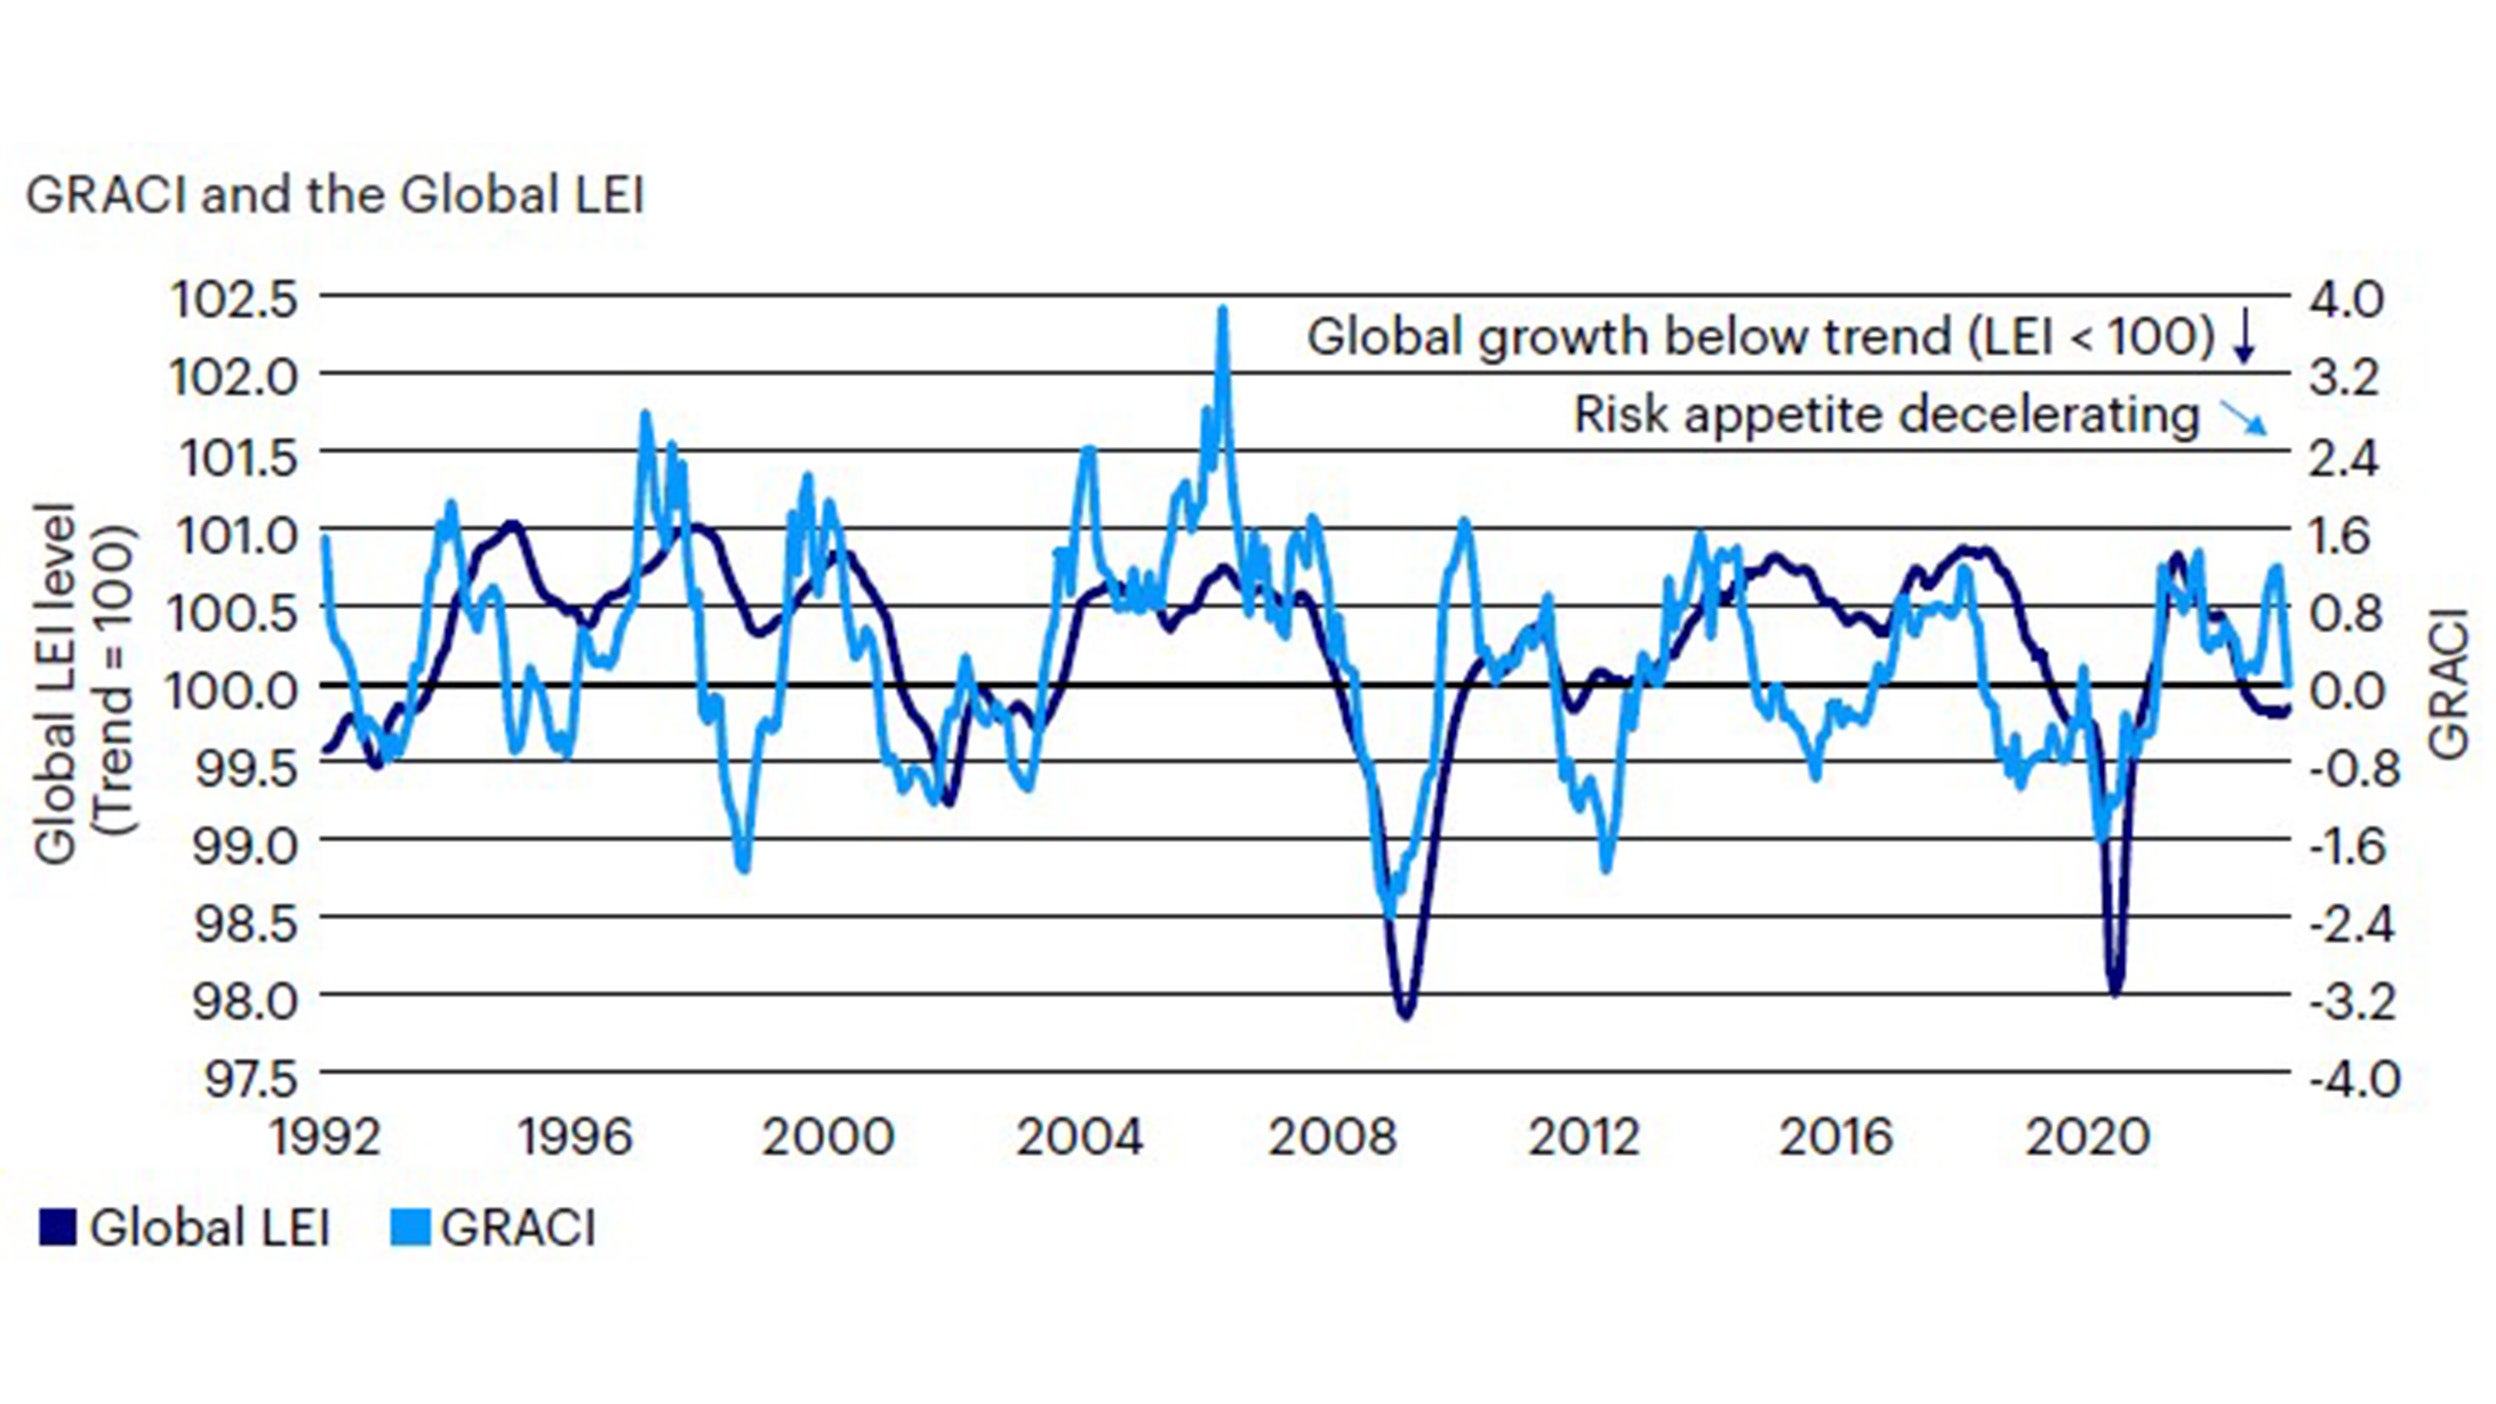 Figure 2: Market sentiment continues to deteriorate pointing to decelerating growth expectations